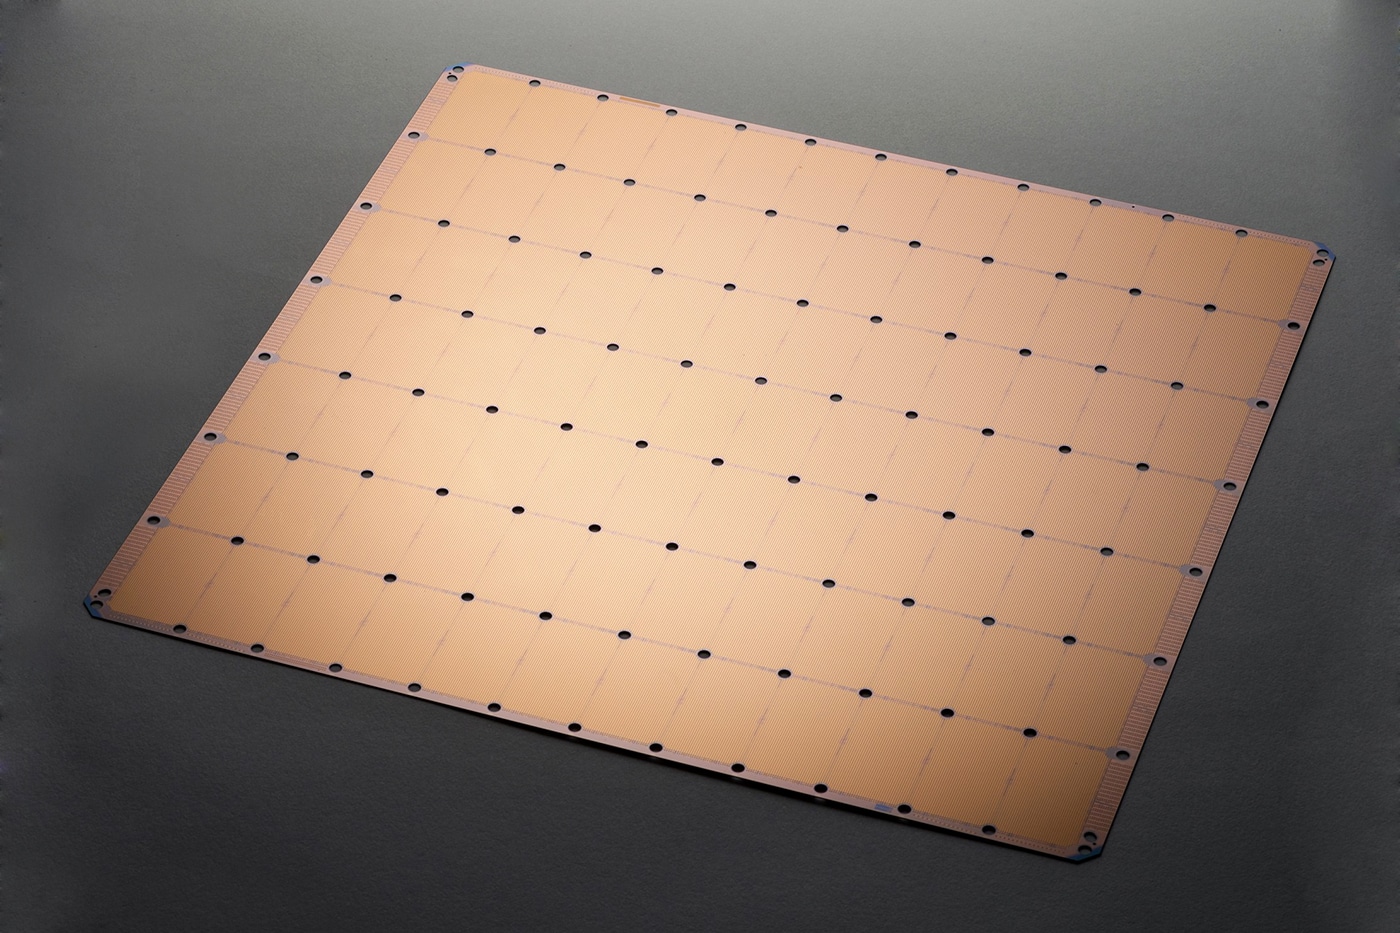 The Wafer Scale Engine (WSE) chip is about the size of an iPad.